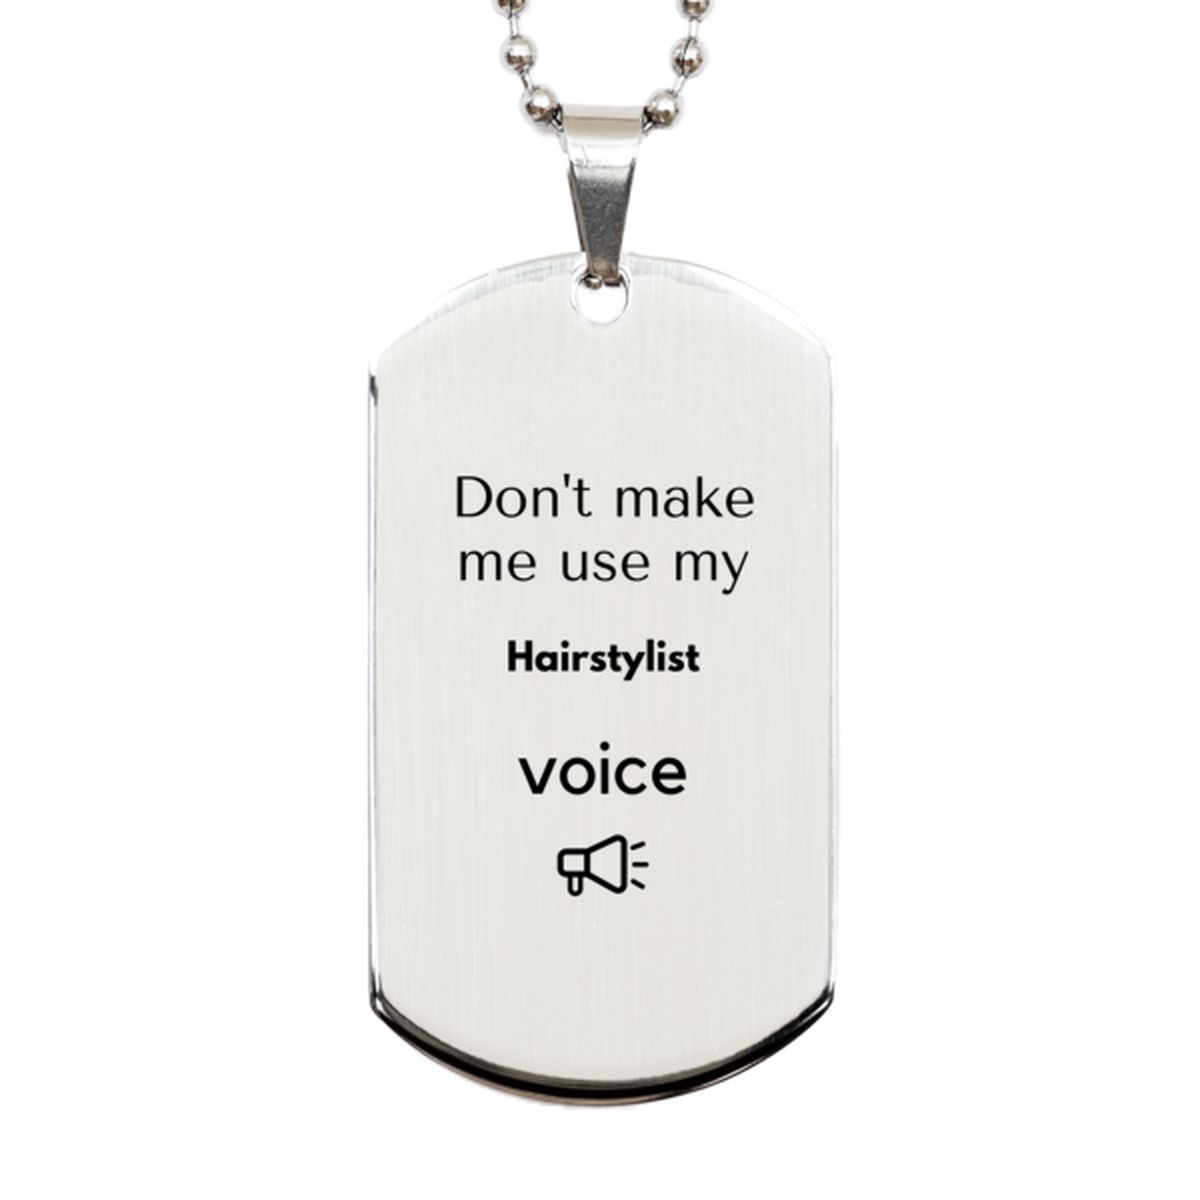 Don't make me use my Hairstylist voice, Sarcasm Hairstylist Gifts, Christmas Hairstylist Silver Dog Tag Birthday Unique Gifts For Hairstylist Coworkers, Men, Women, Colleague, Friends